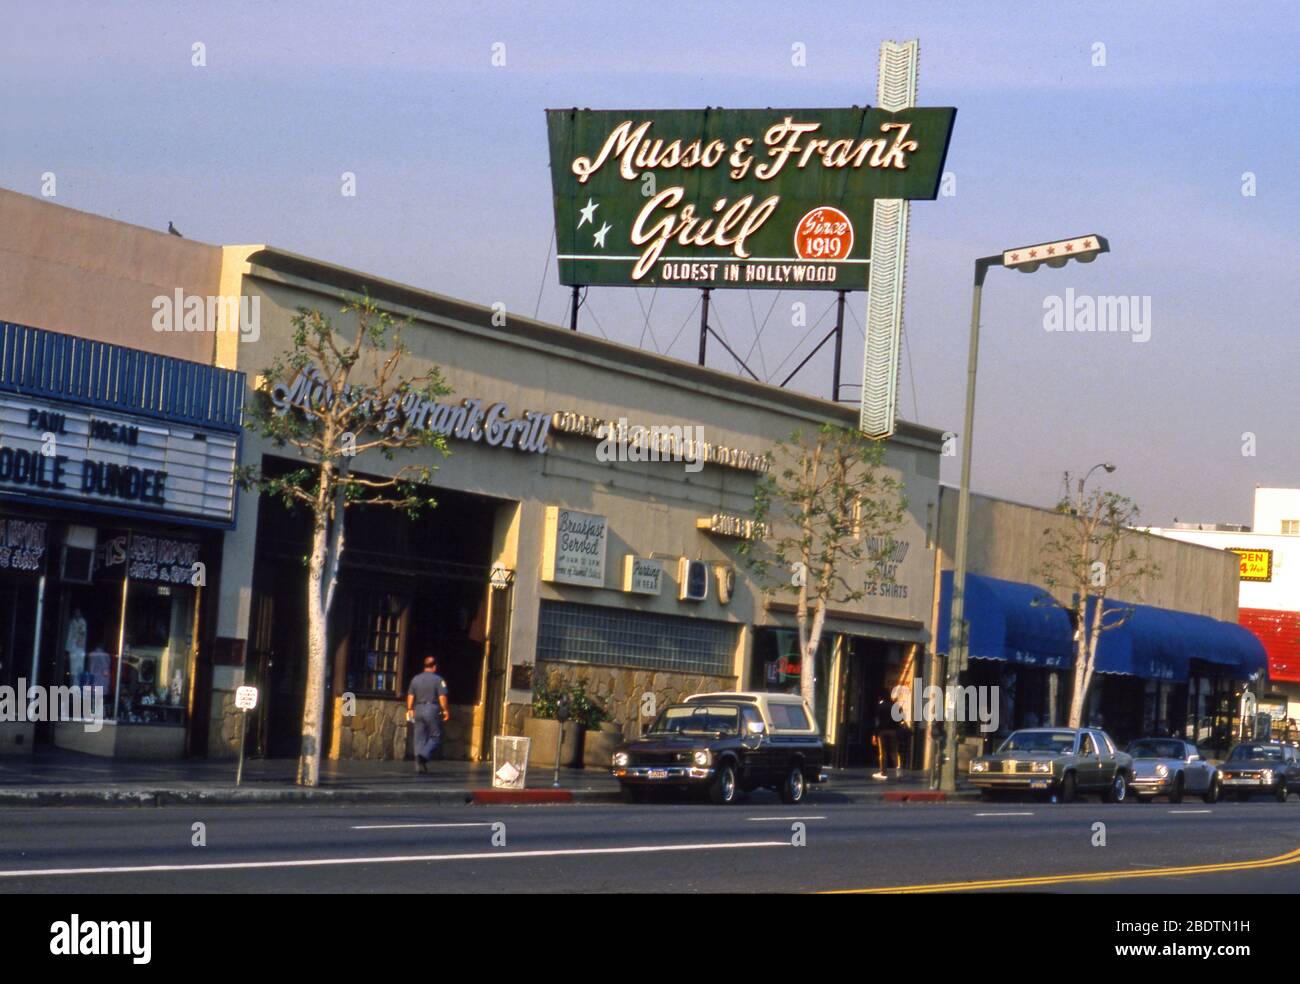 Musso and Frank Grill on Hollywood Blvd. in Los Angeles, CA Stock Photo -